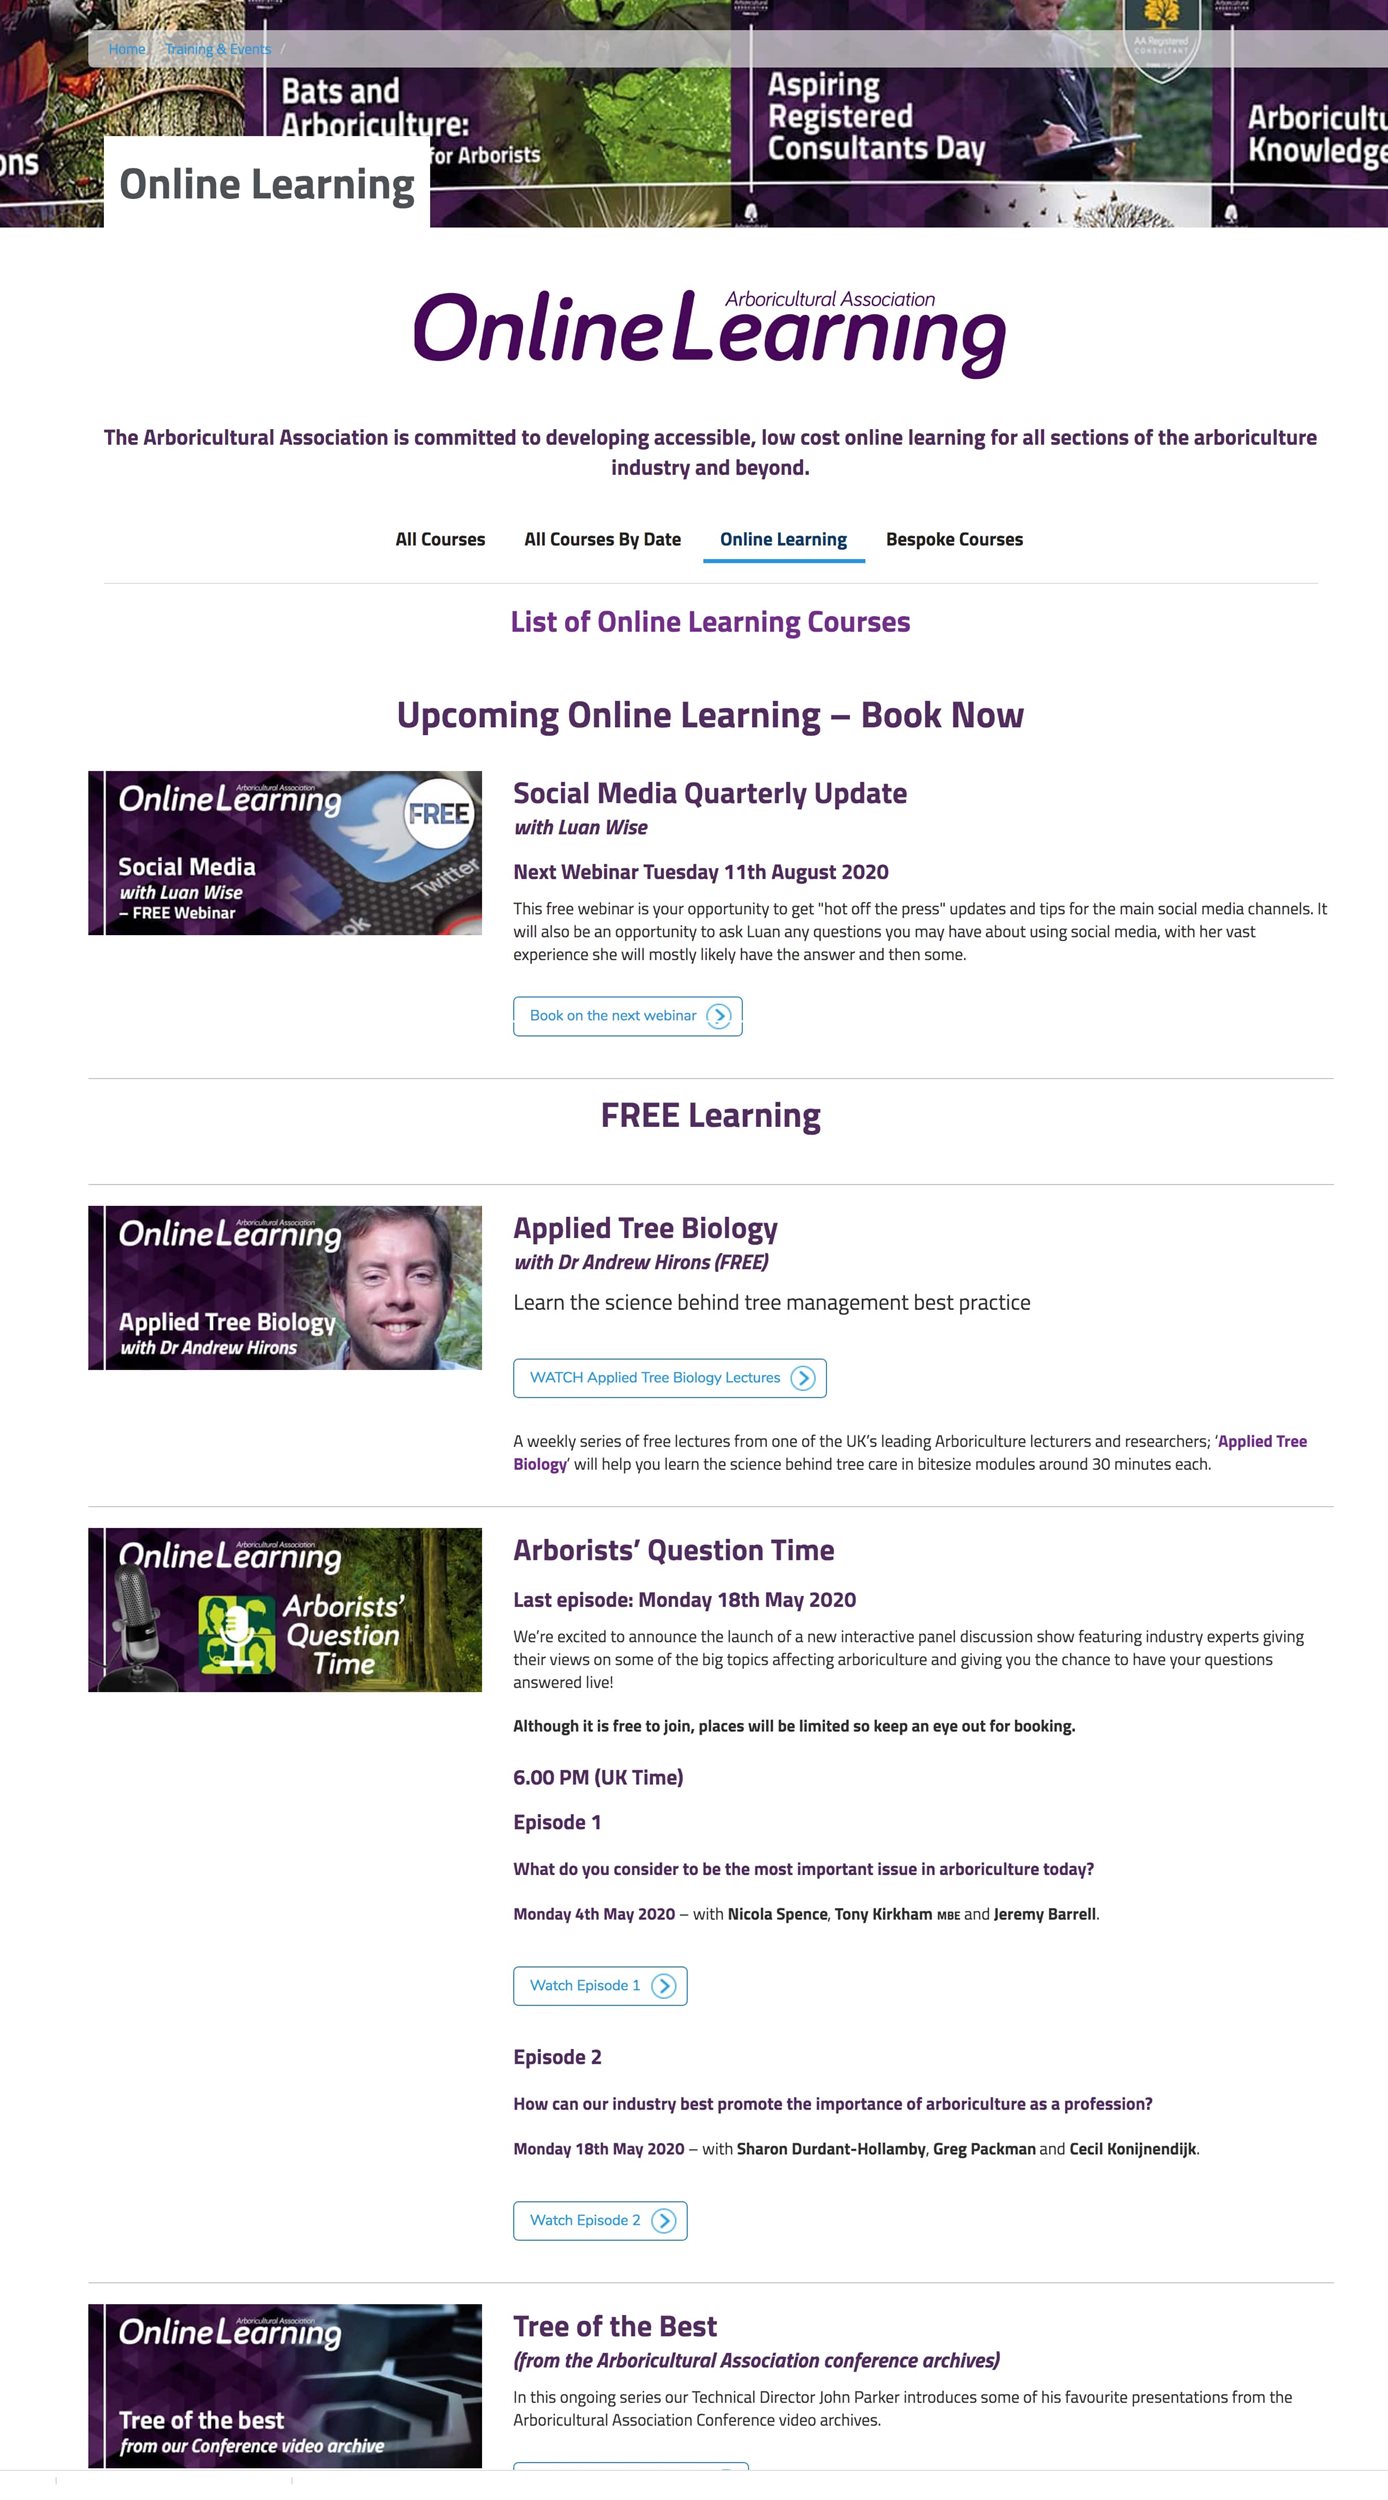 Online Learning page